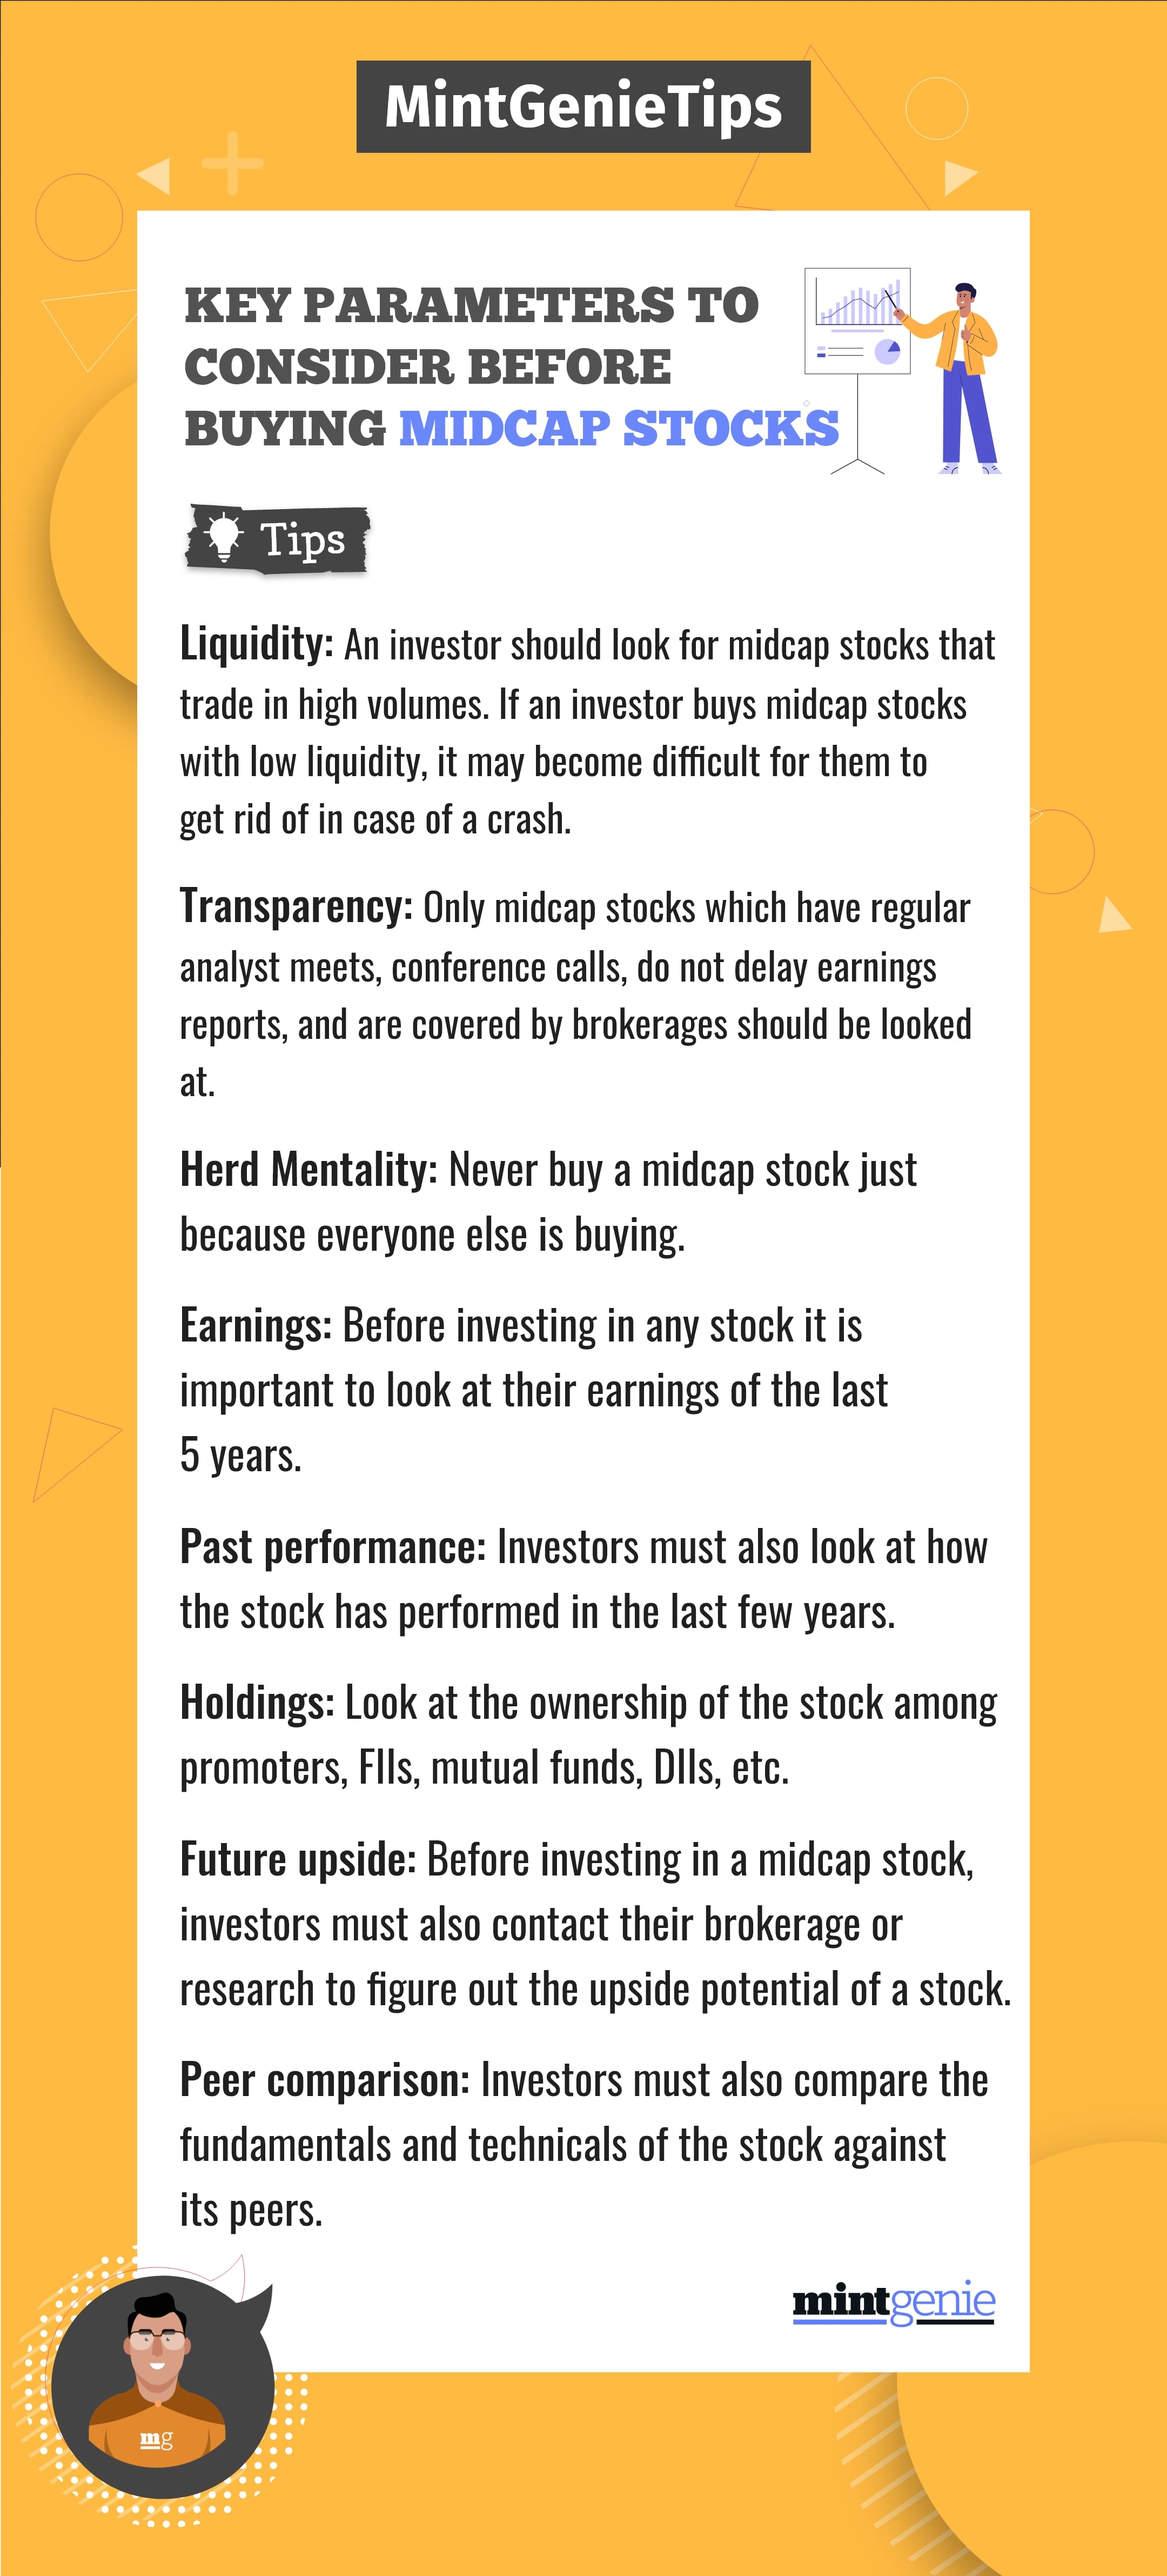 Key parameters to consider before buying midcap stocks